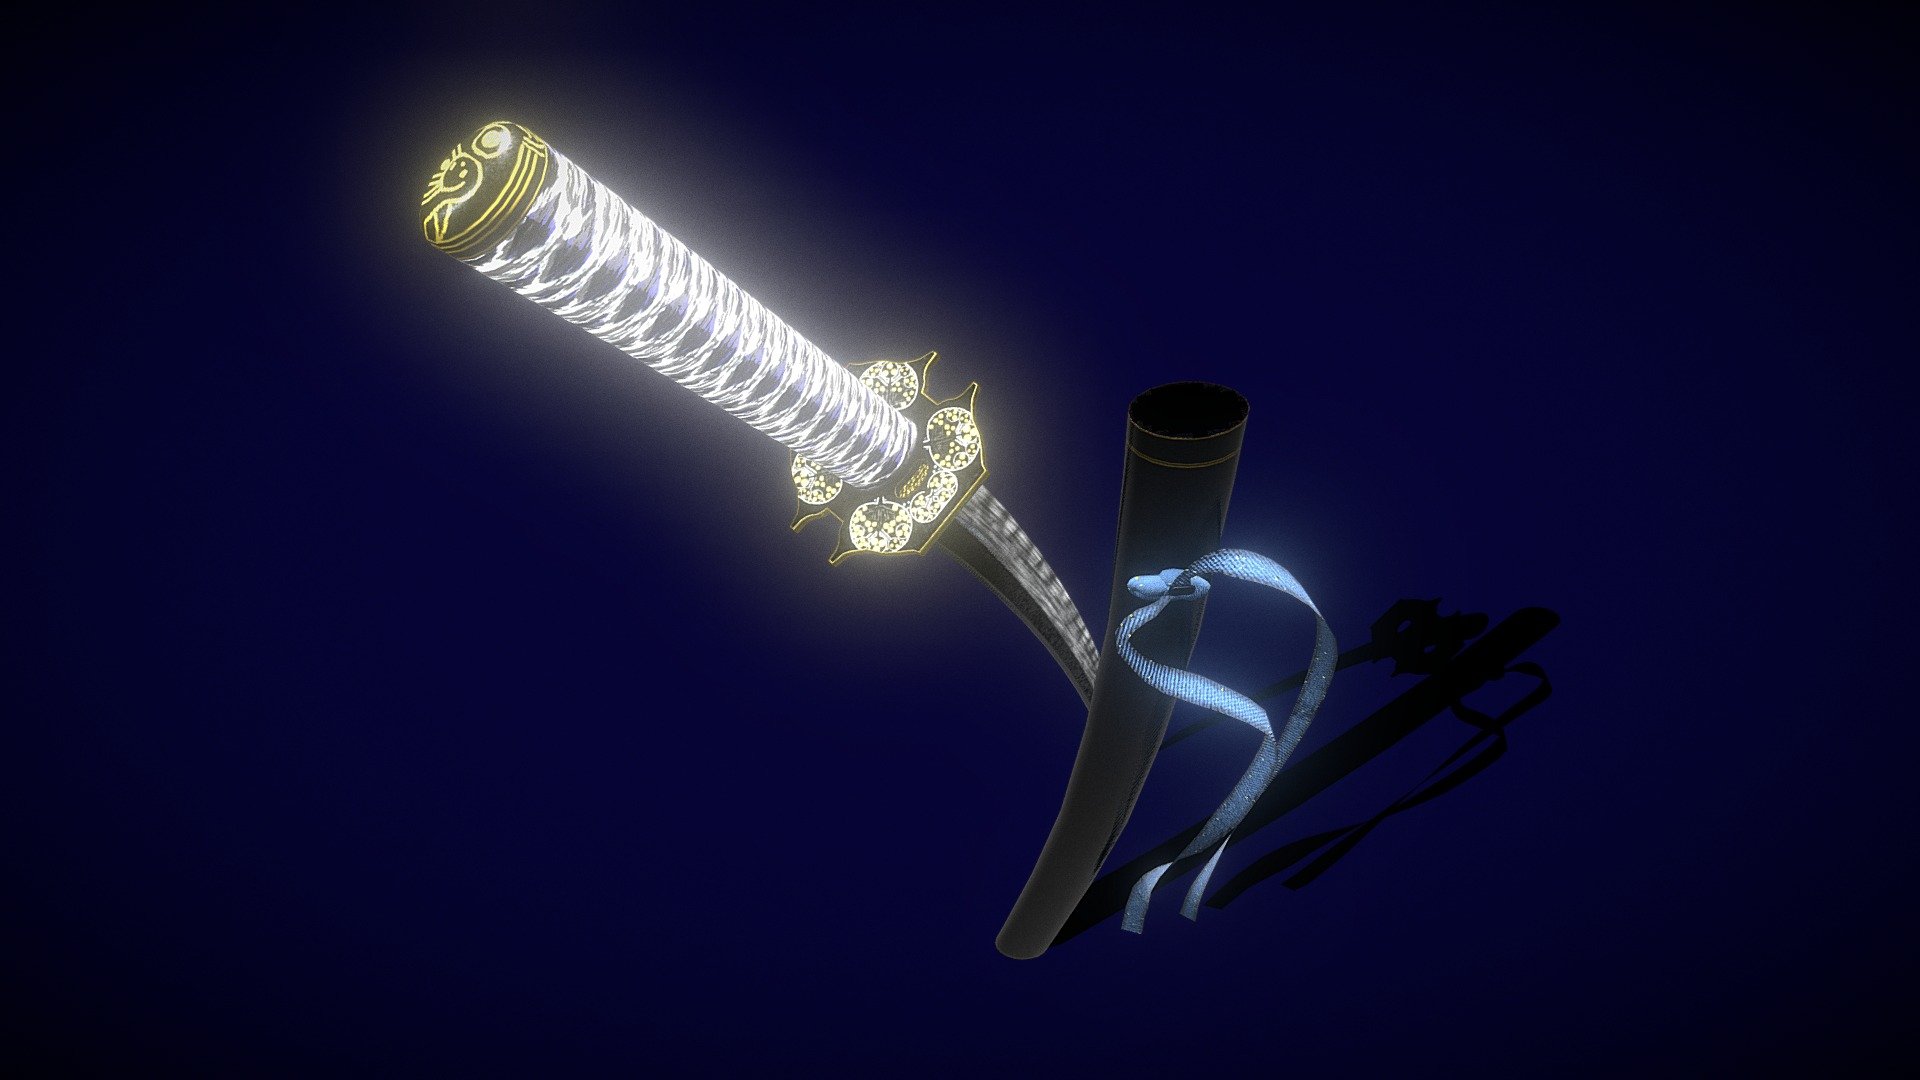 Devil May Cry 3 - Yamato Sword Of Vergil, handforged